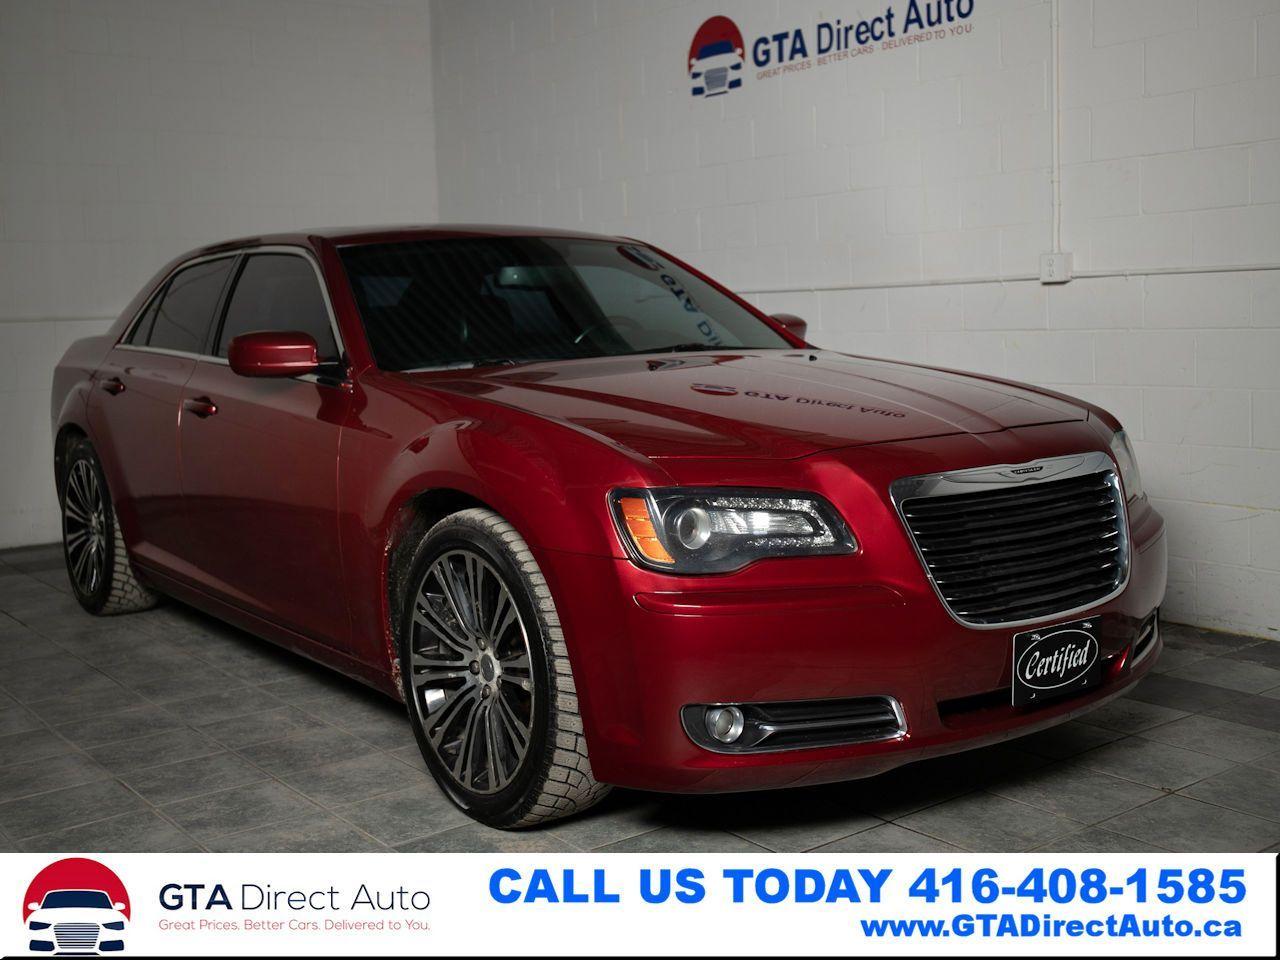 Used 2012 Chrysler 300 300s Panoroof Leather Beats V6